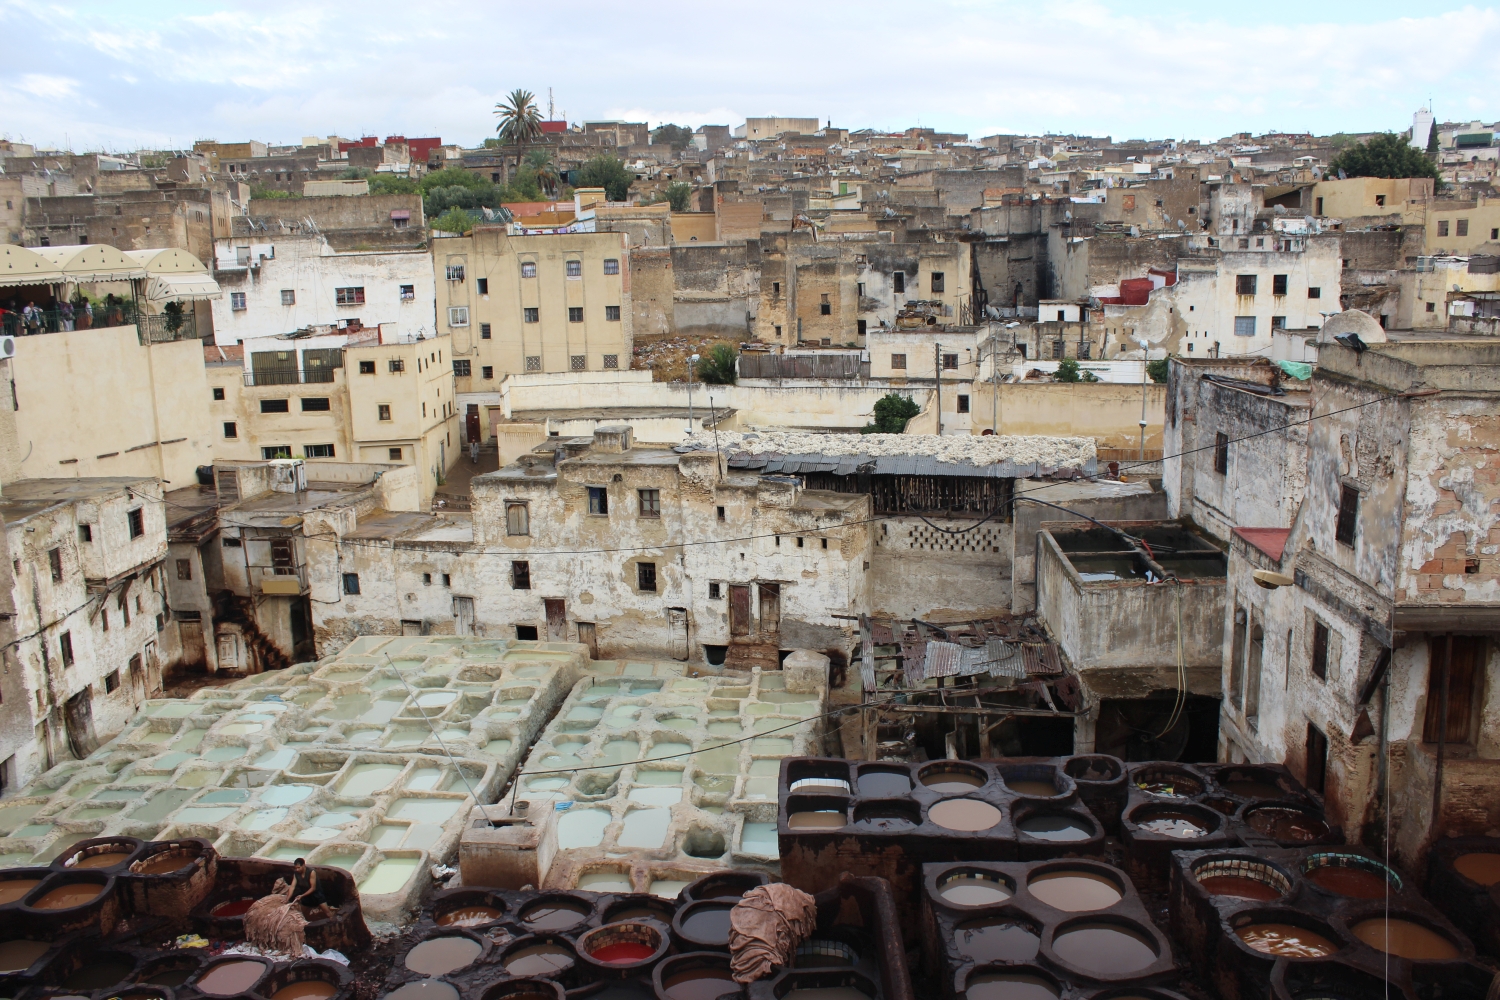 General view of the tannery and the surrounding city